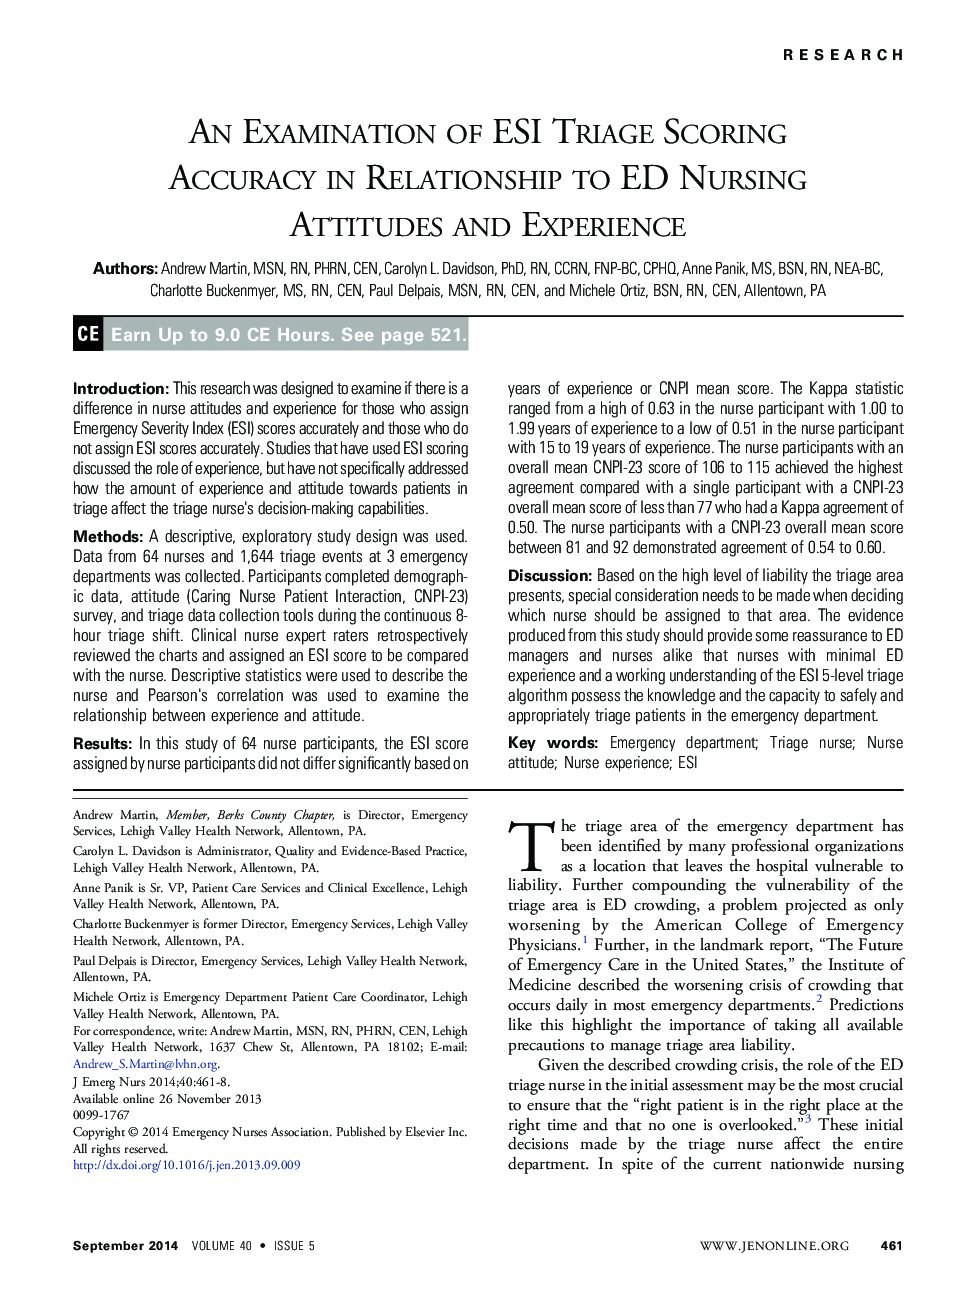 An Examination of ESI Triage Scoring Accuracy in Relationship to ED Nursing Attitudes and Experience 